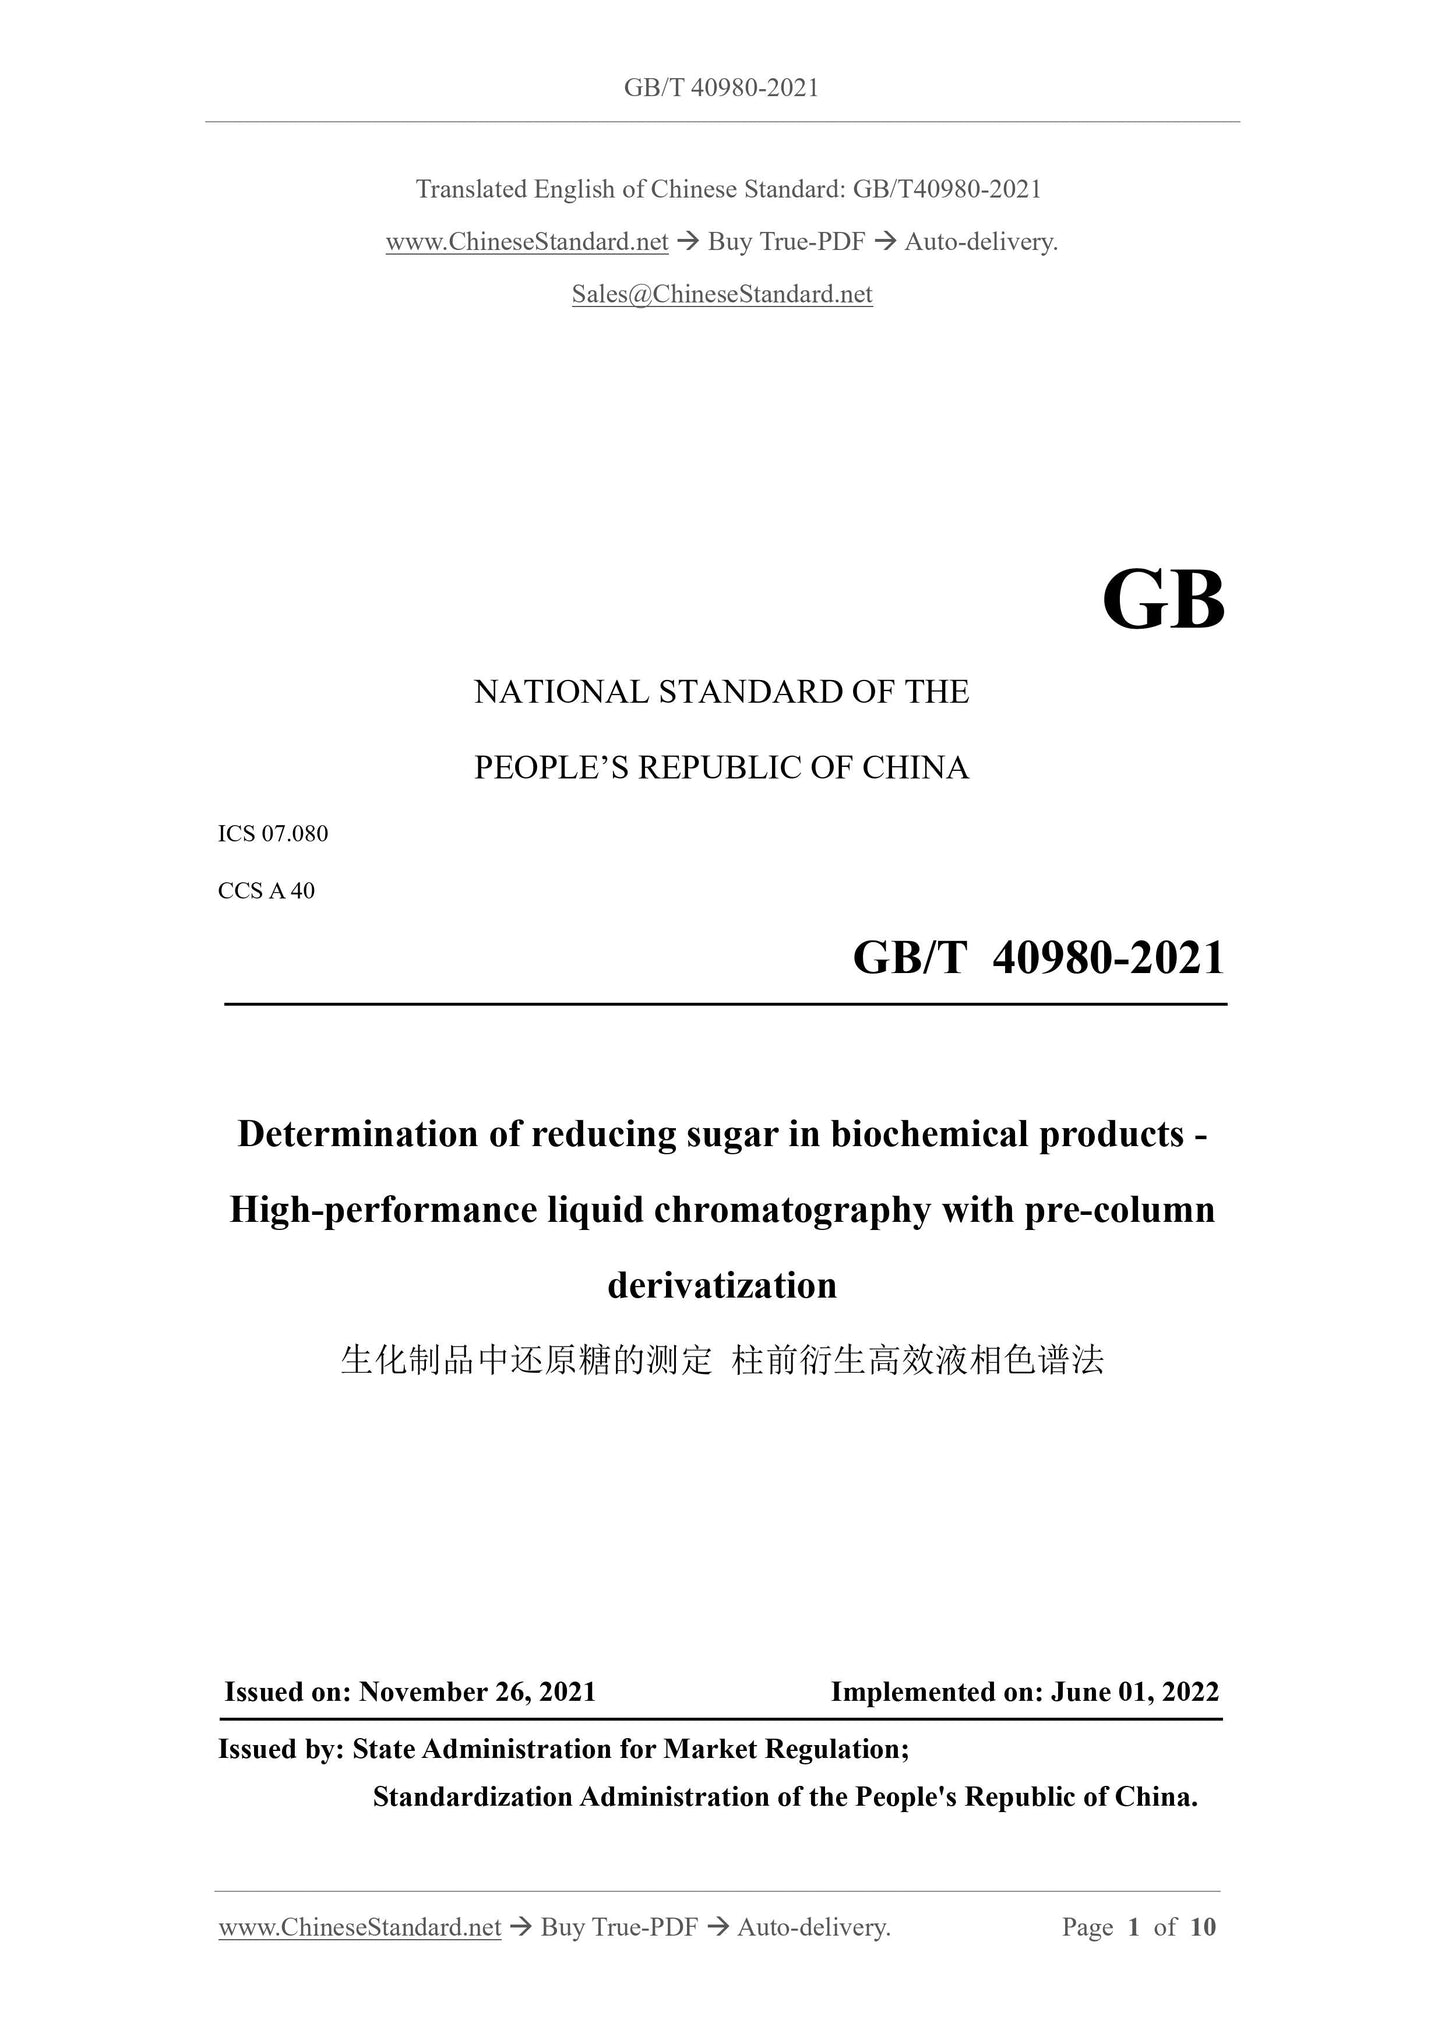 GB/T 40980-2021 Page 1